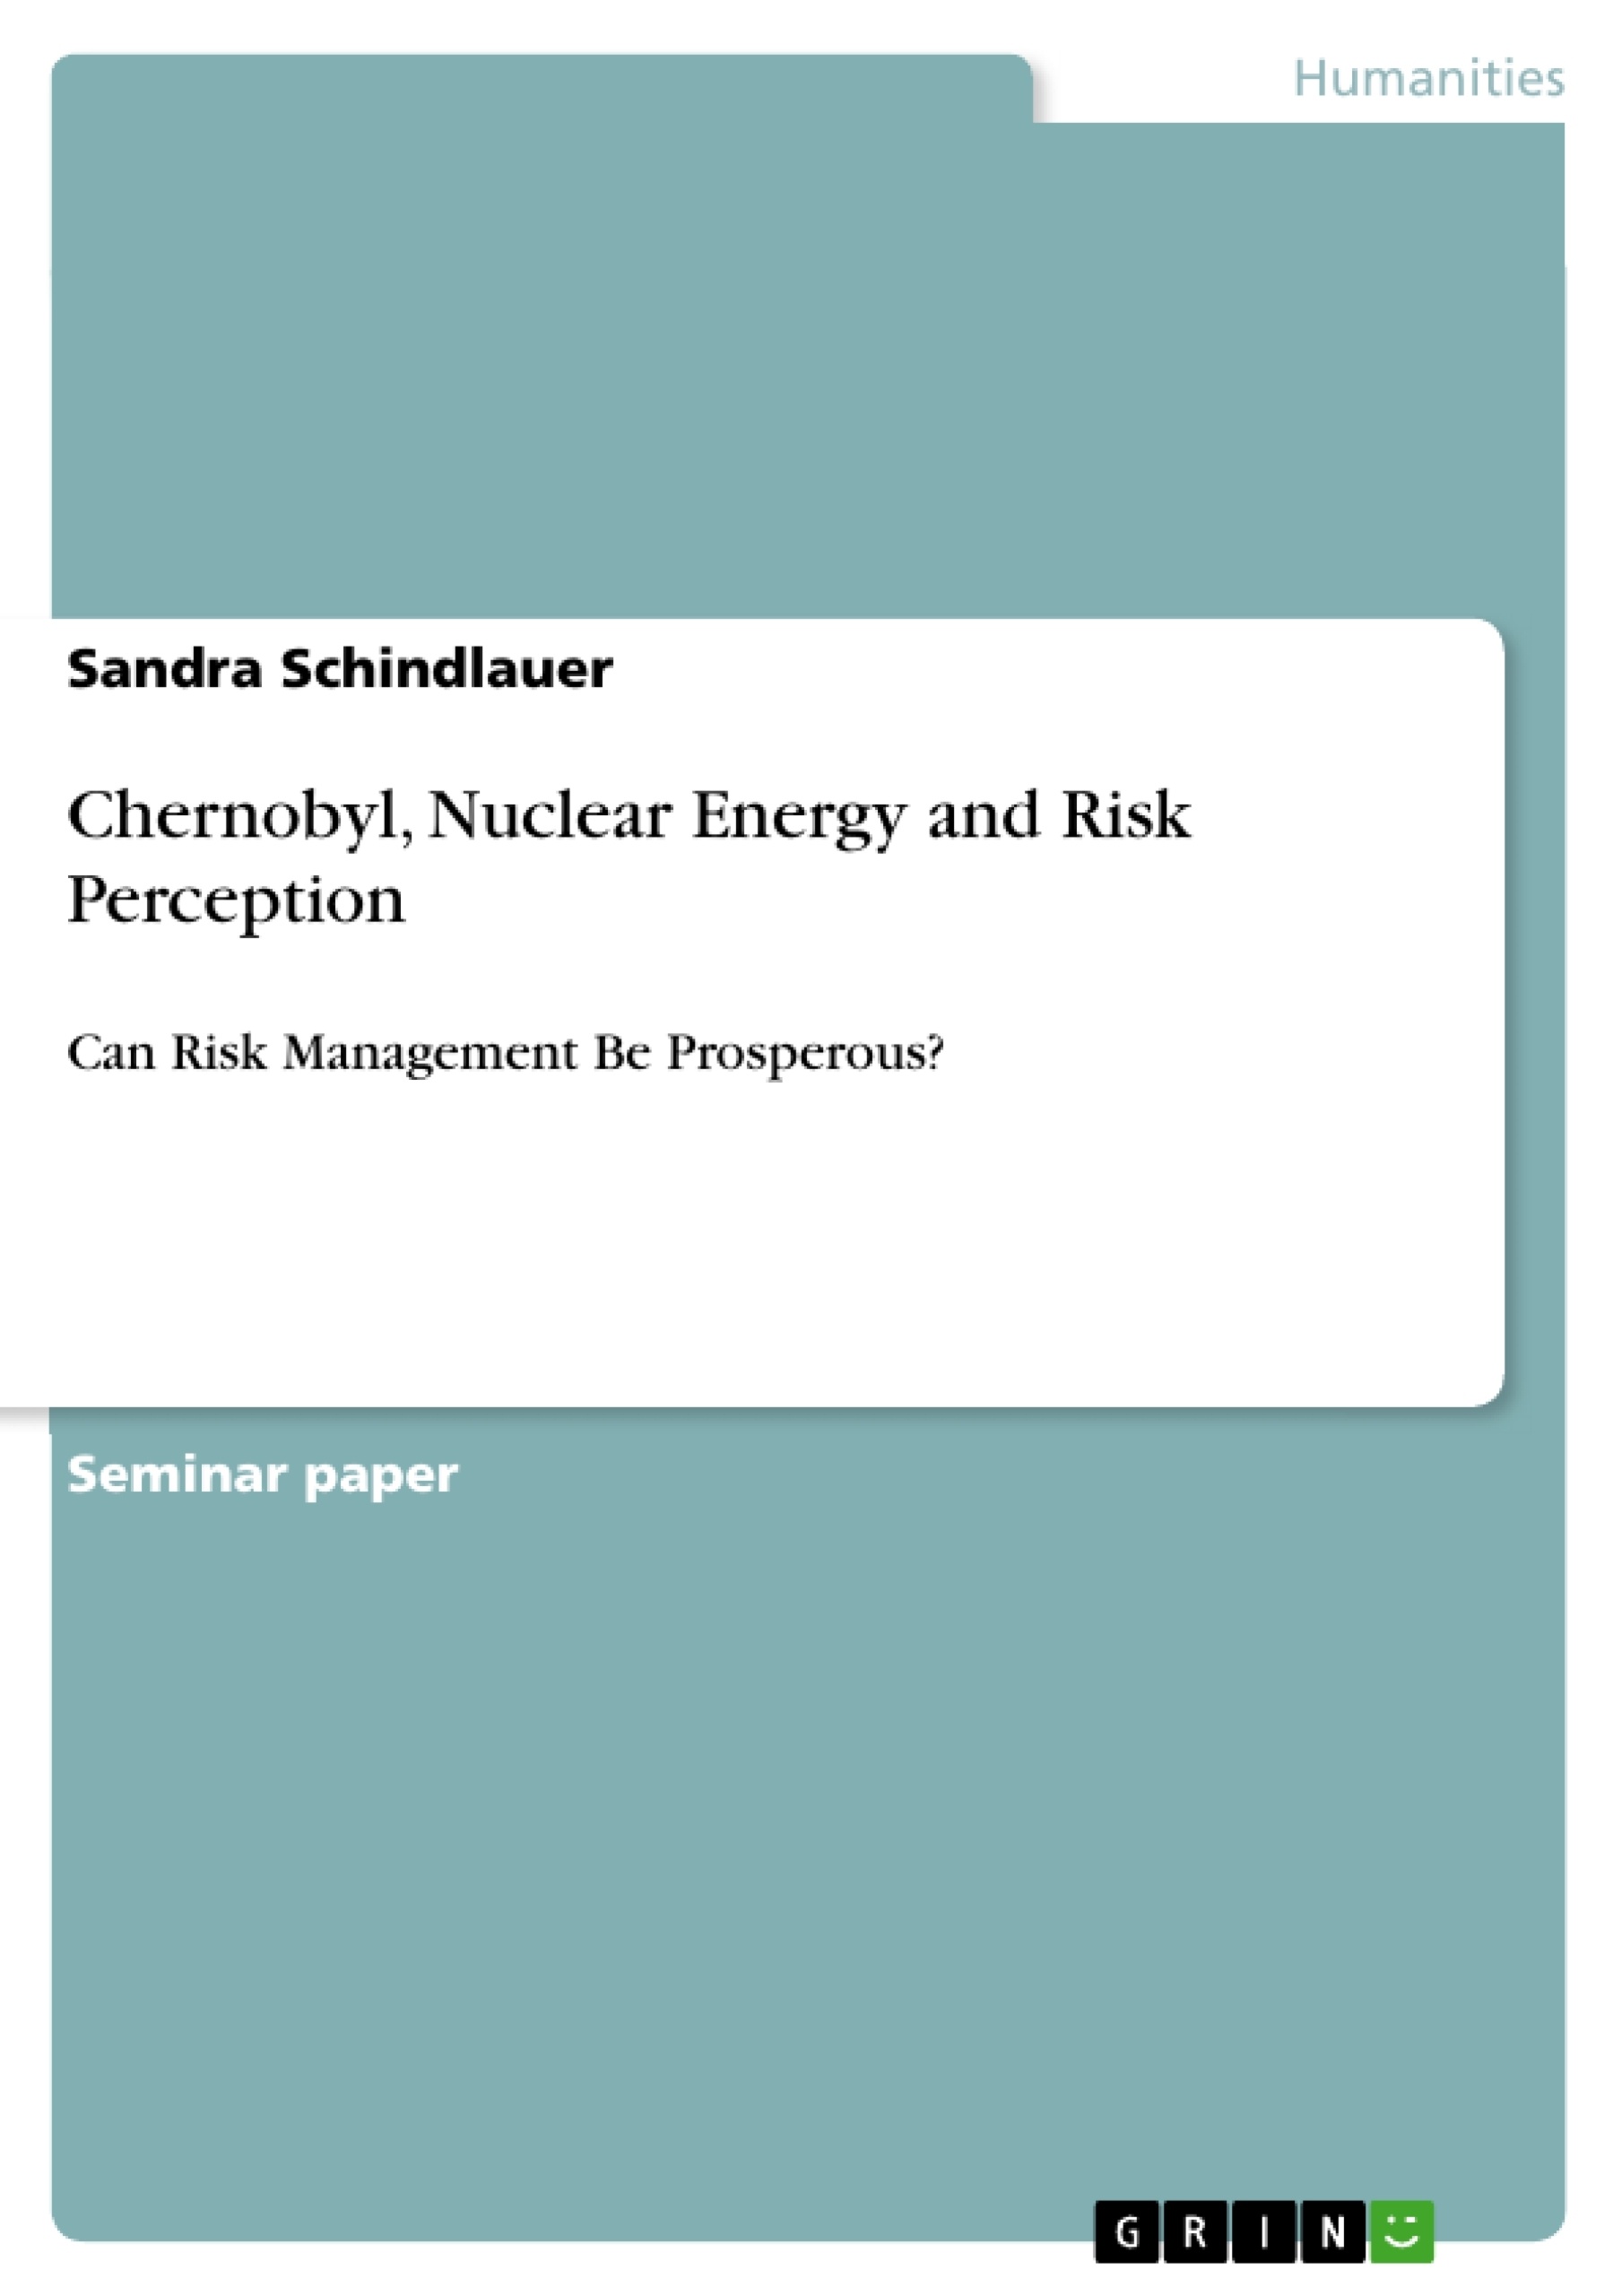 Title: Chernobyl, Nuclear Energy and Risk Perception